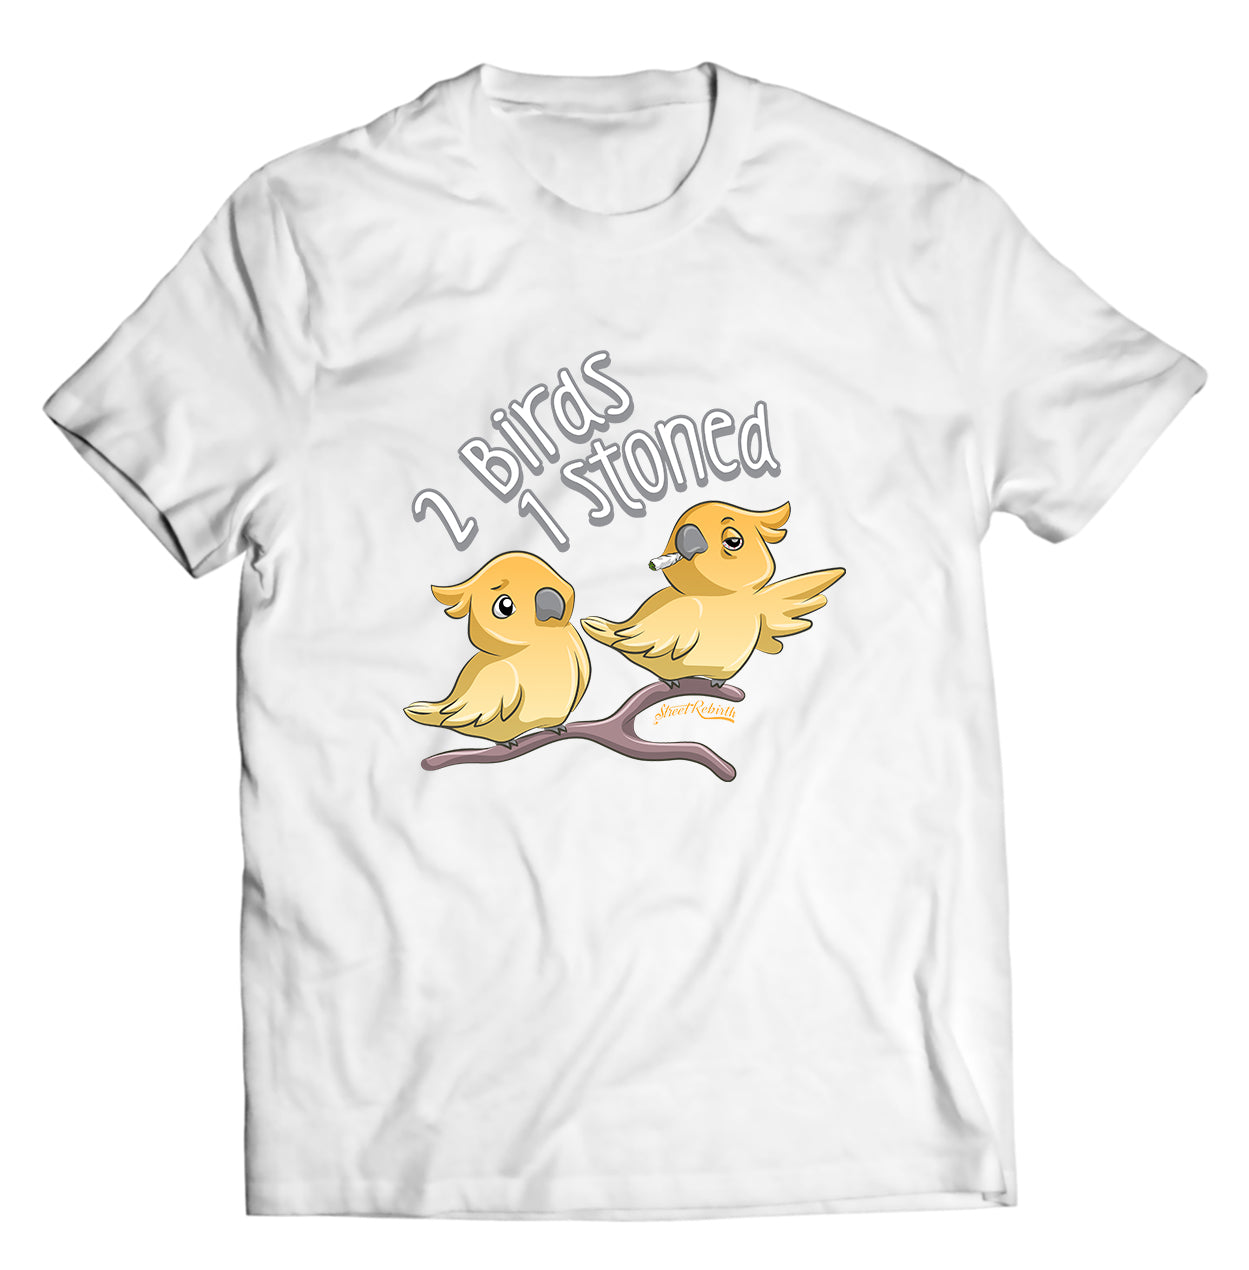 SHIRTS - TWO BIRDS ONE STONED